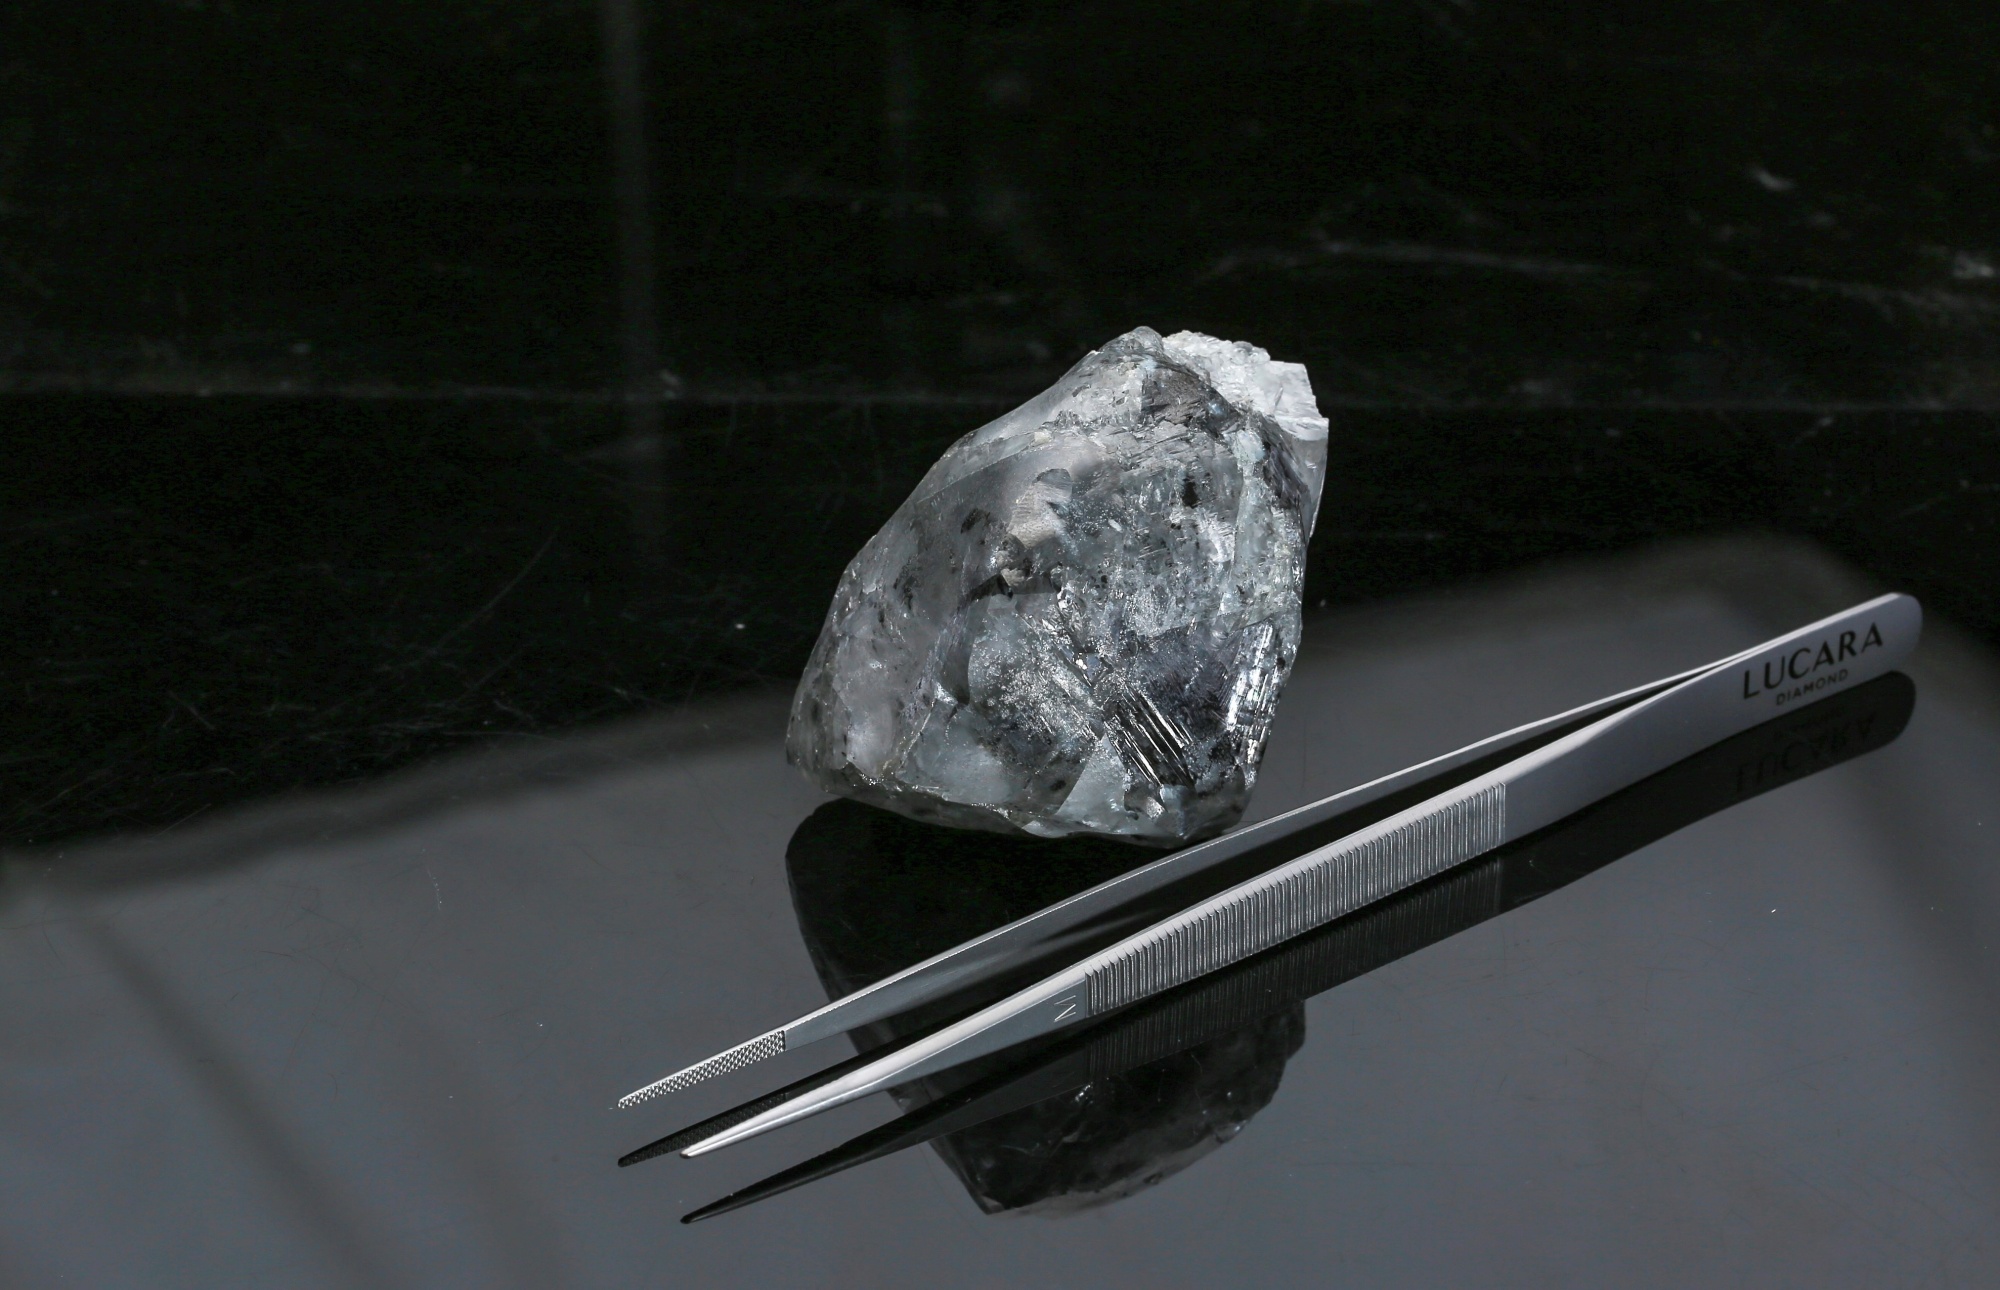 The Second-Biggest Diamond in History Has a New Owner - The New York Times